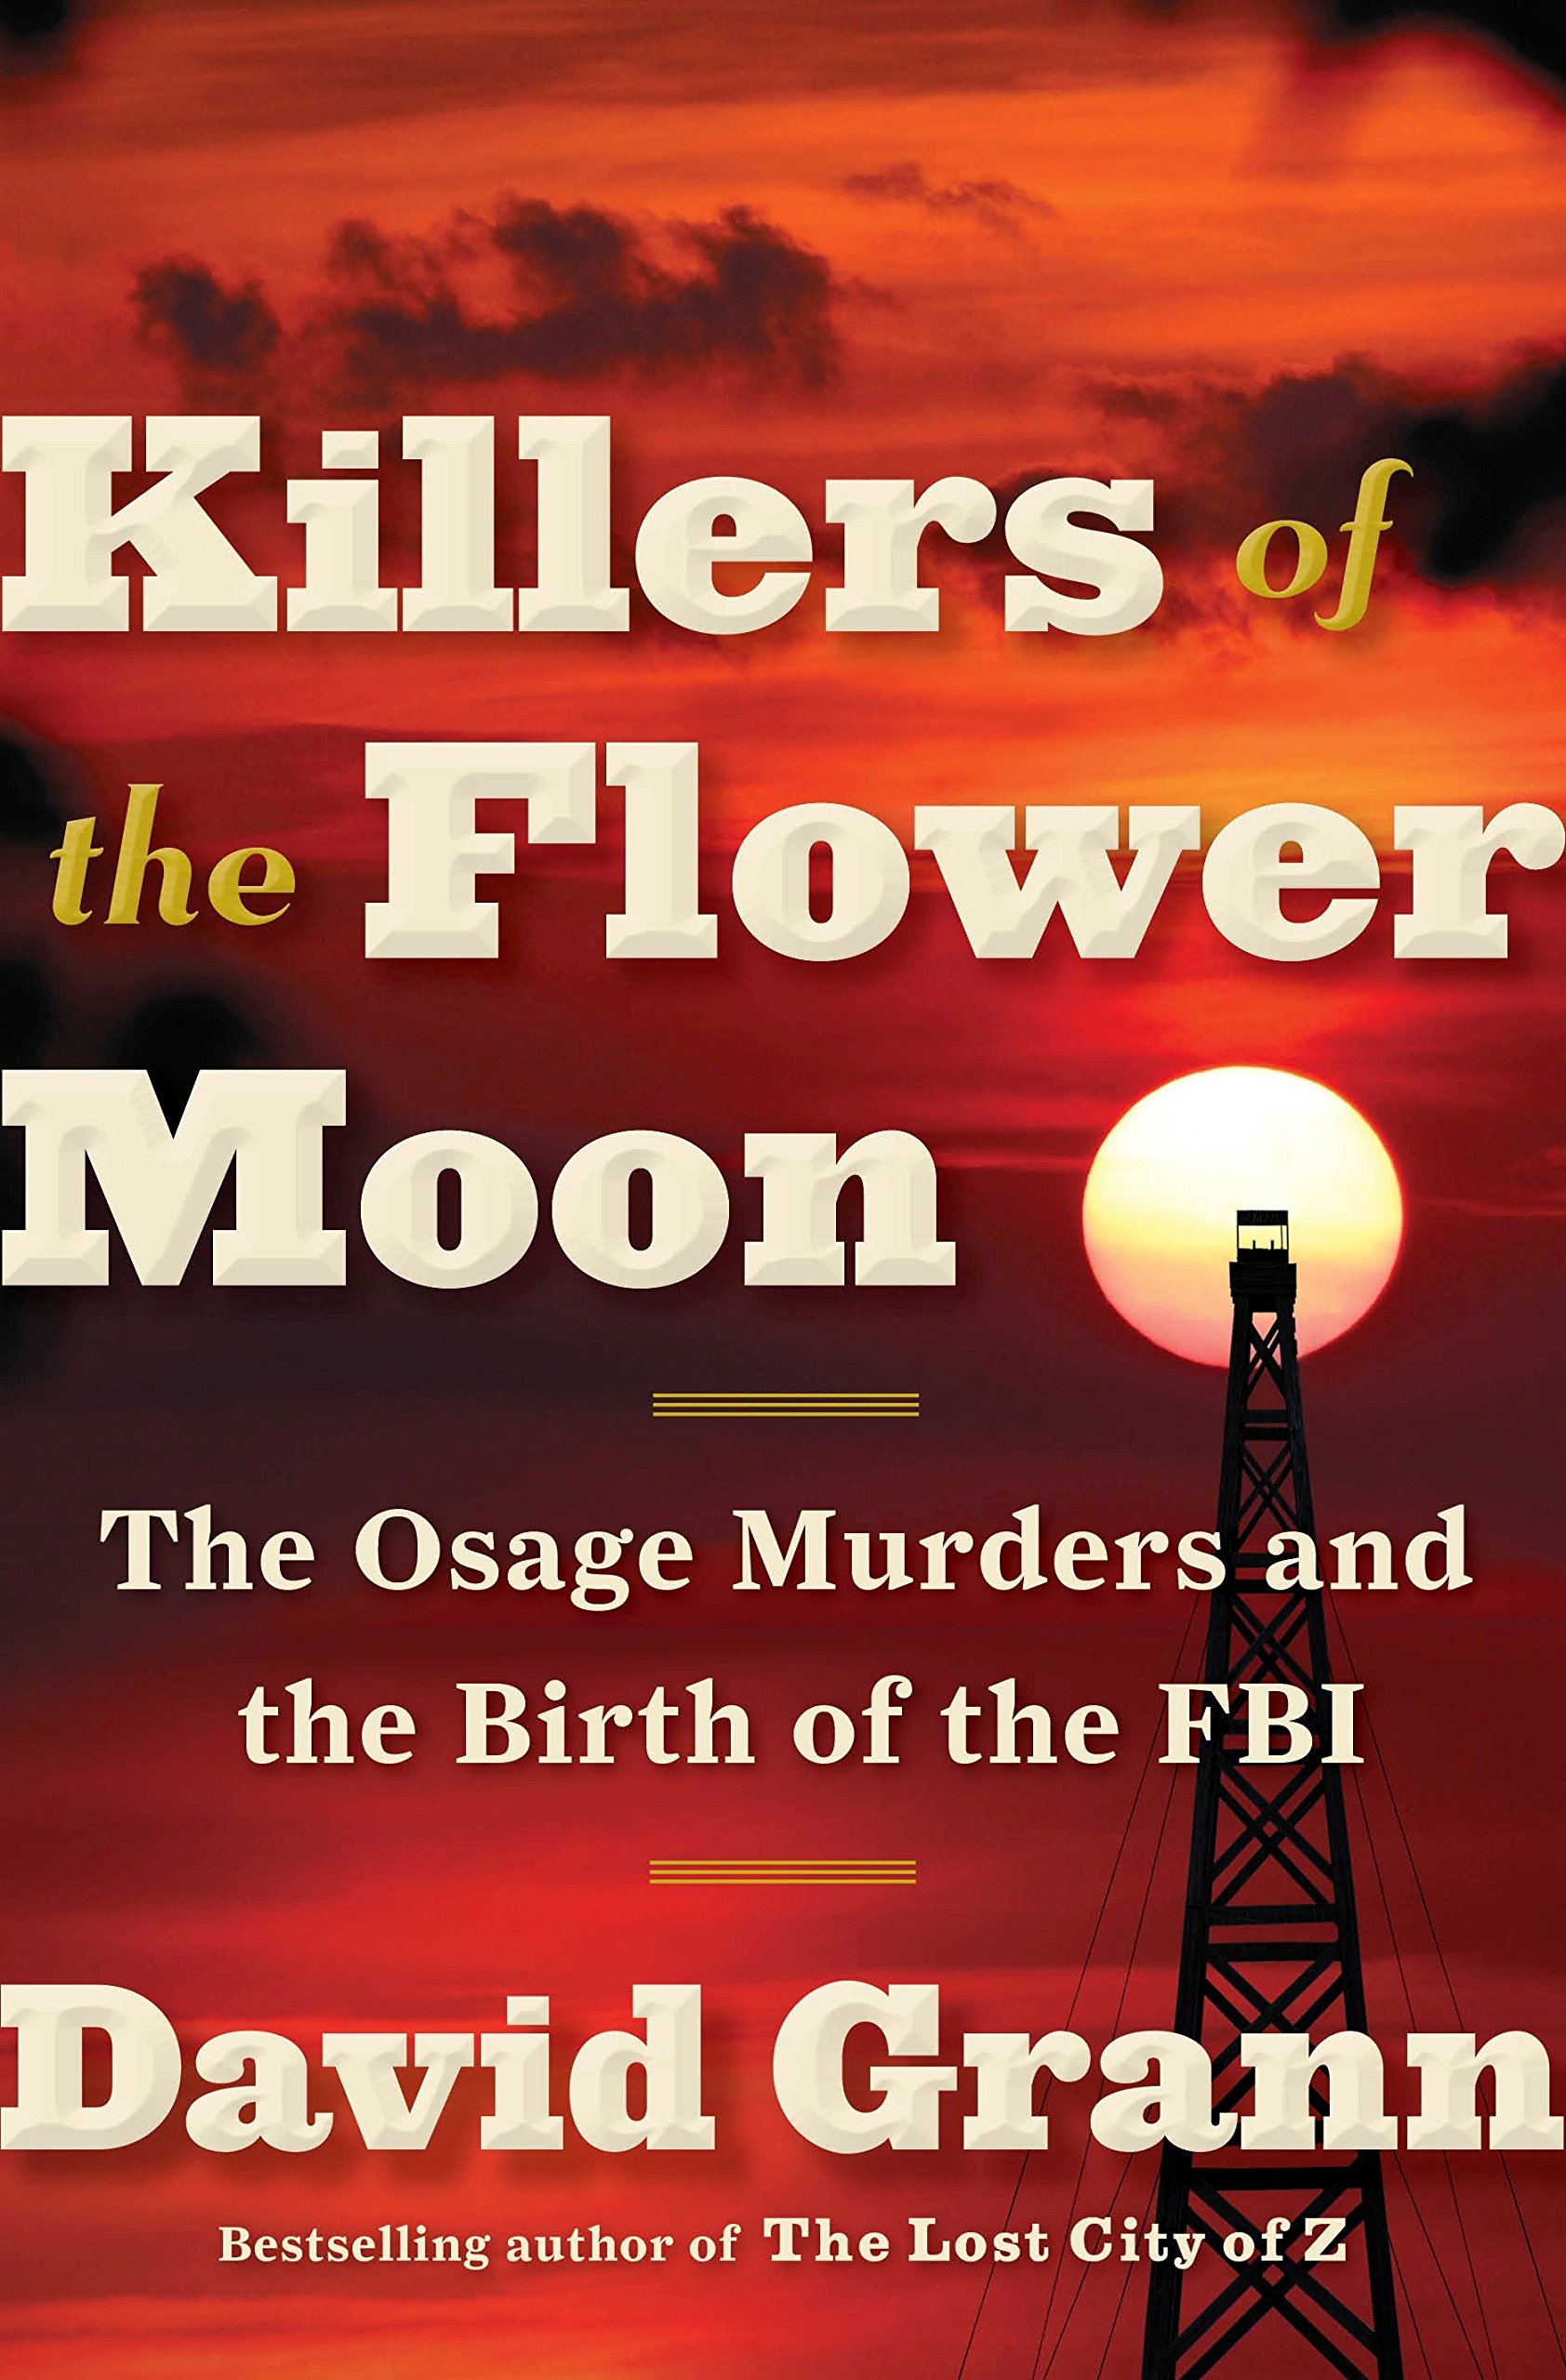 Cover of Killers of the Flower Moon. An oil tower is in front of a full moon and a red/orange sky.